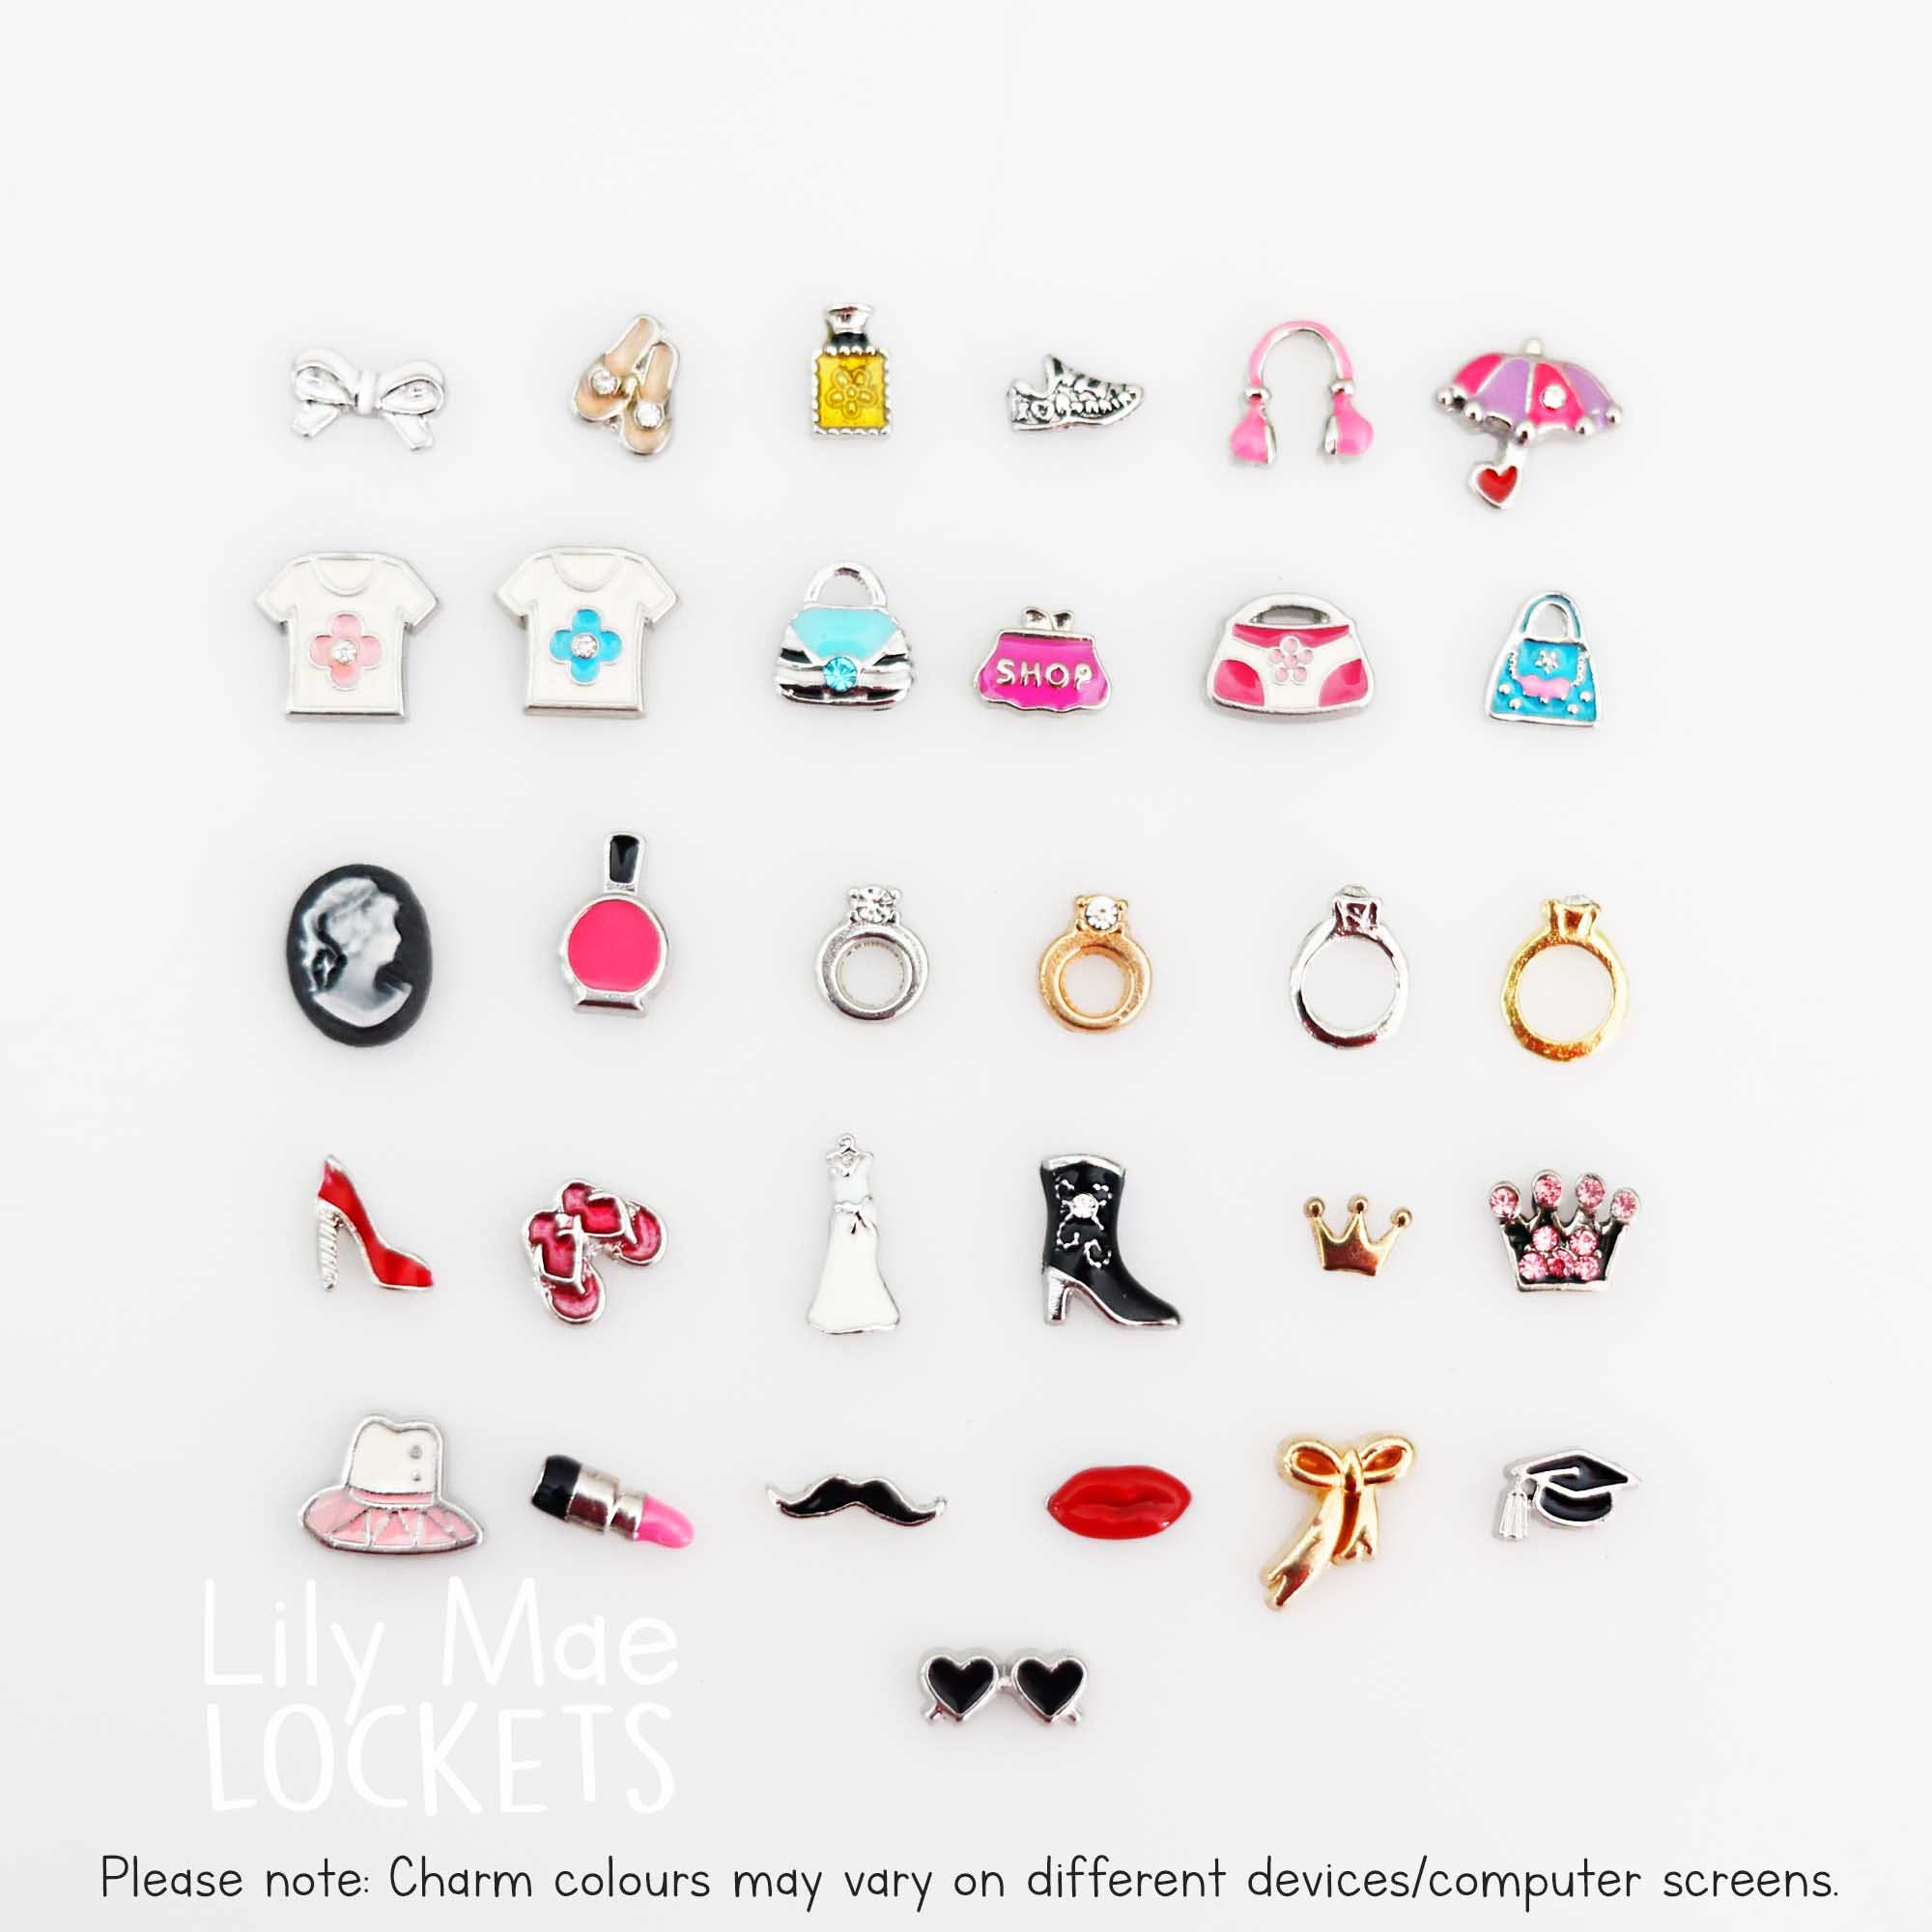 New Sale Floating Charms mix Style Zinc Alloy Fit Floating Charm